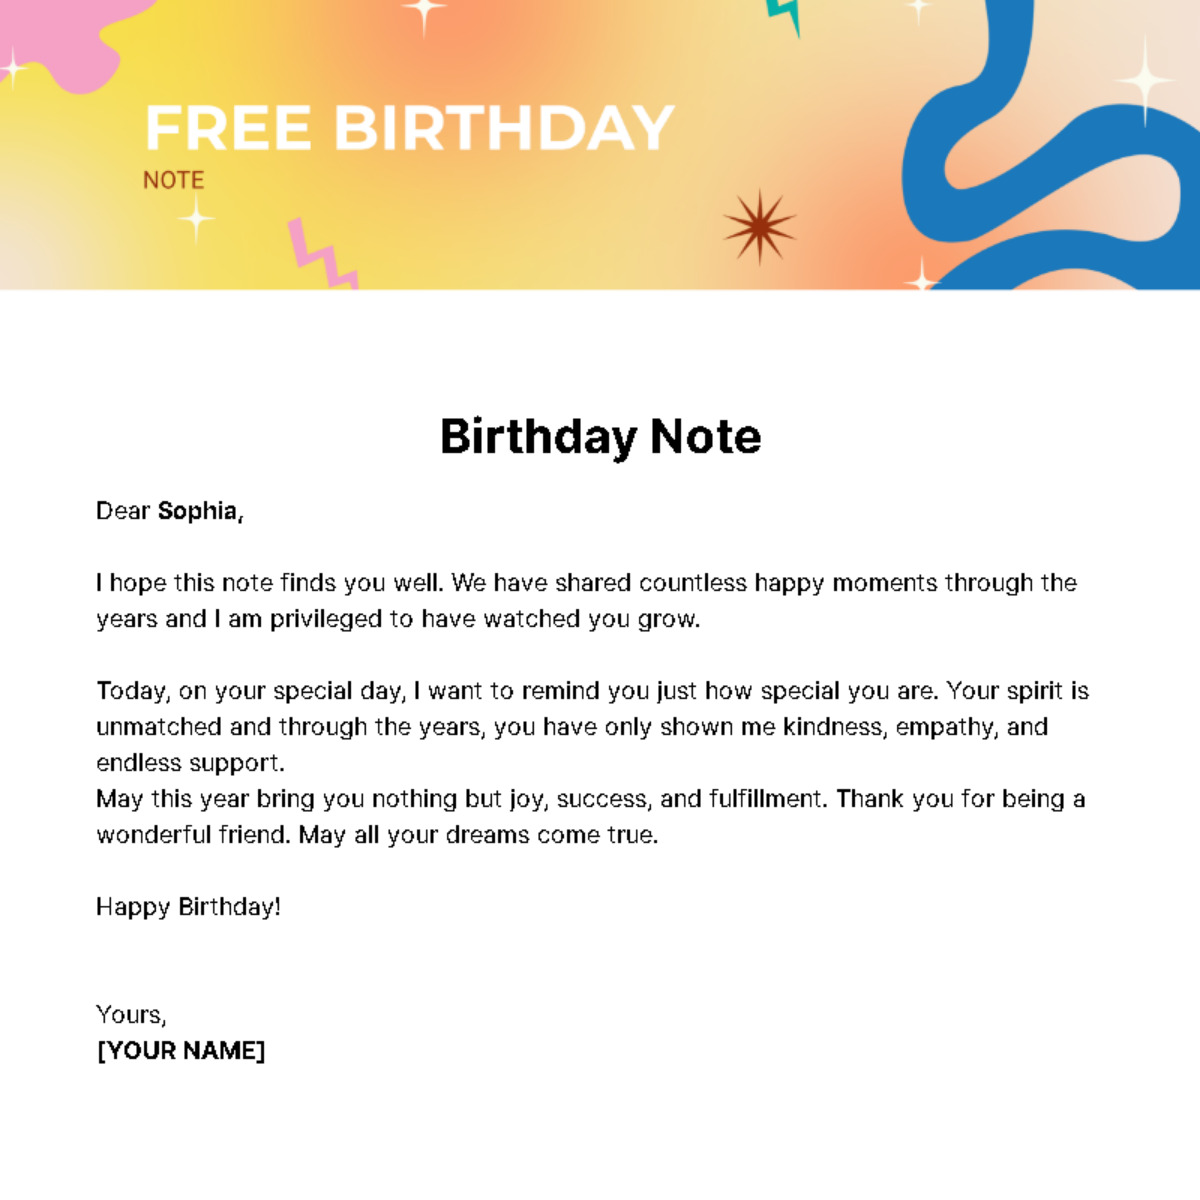 Free Birthday Note Template